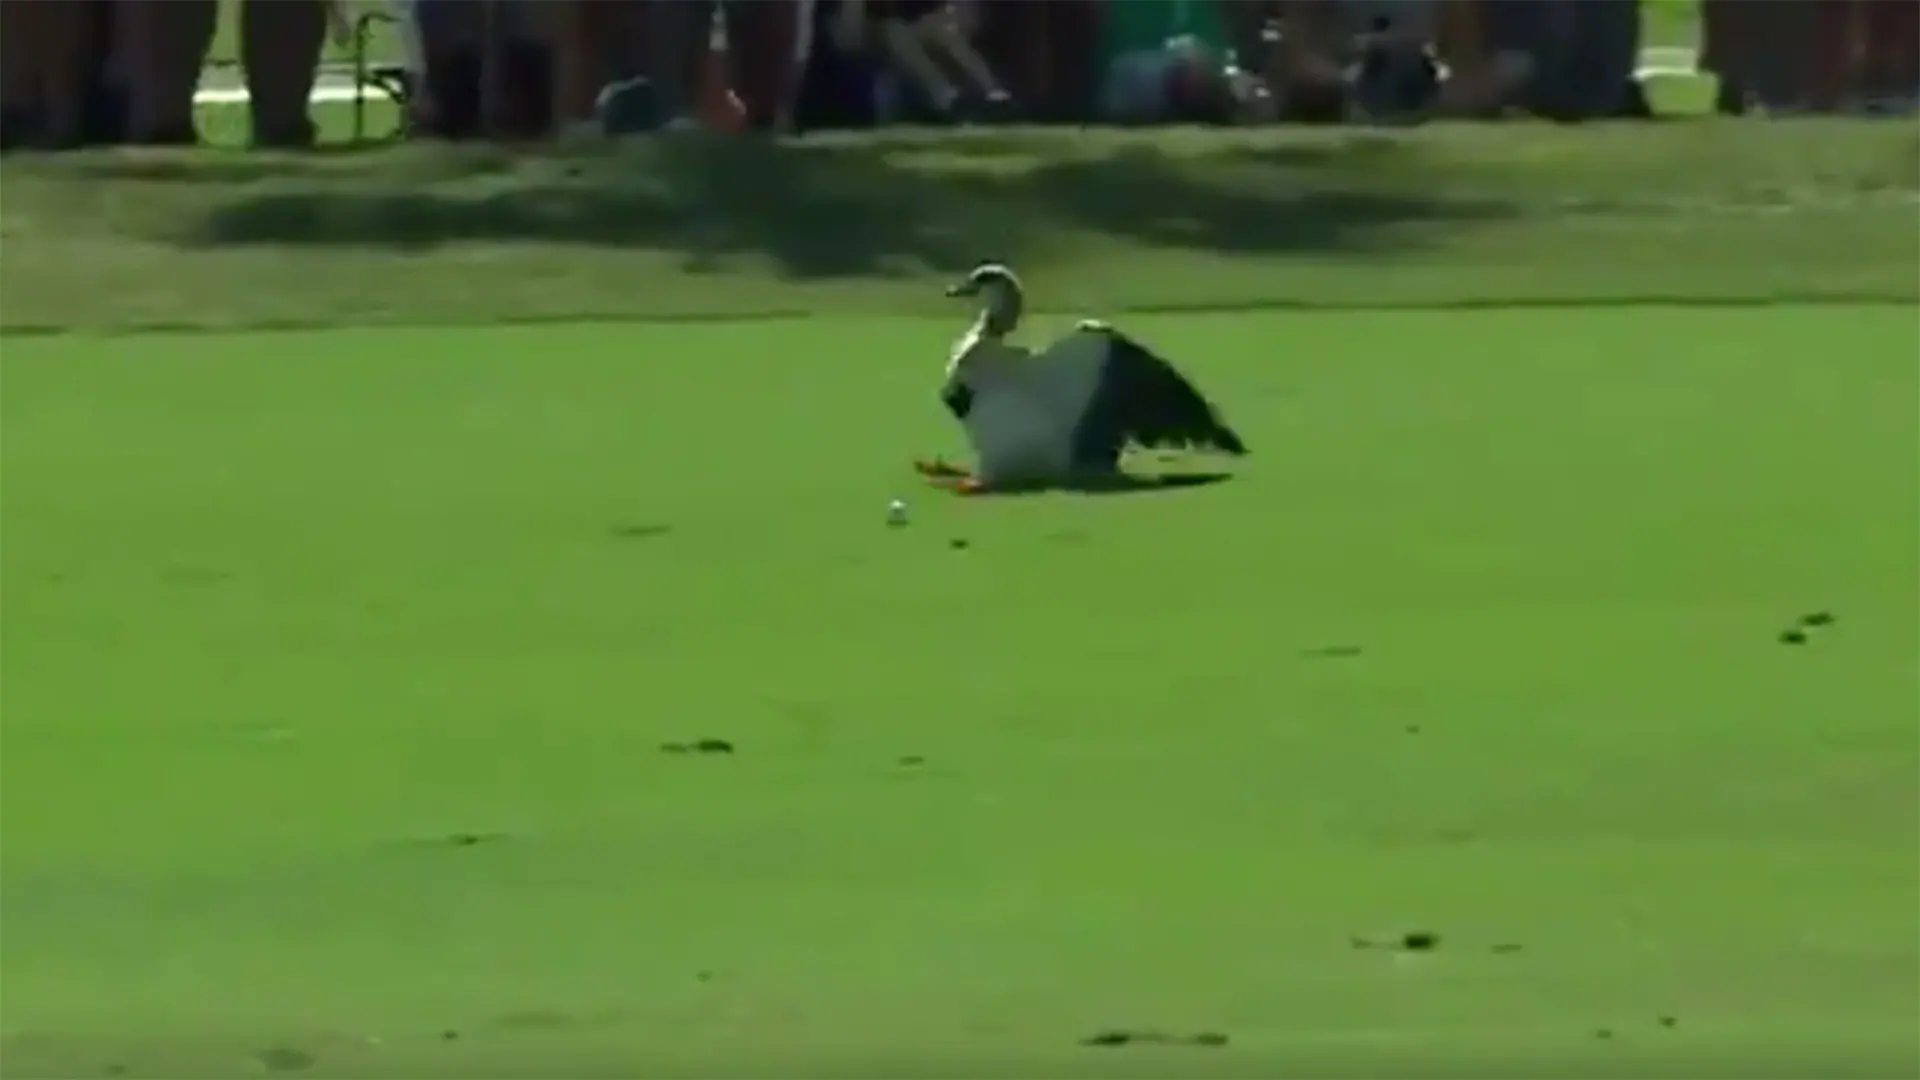 Watch: Tiger's drive startles strolling duck